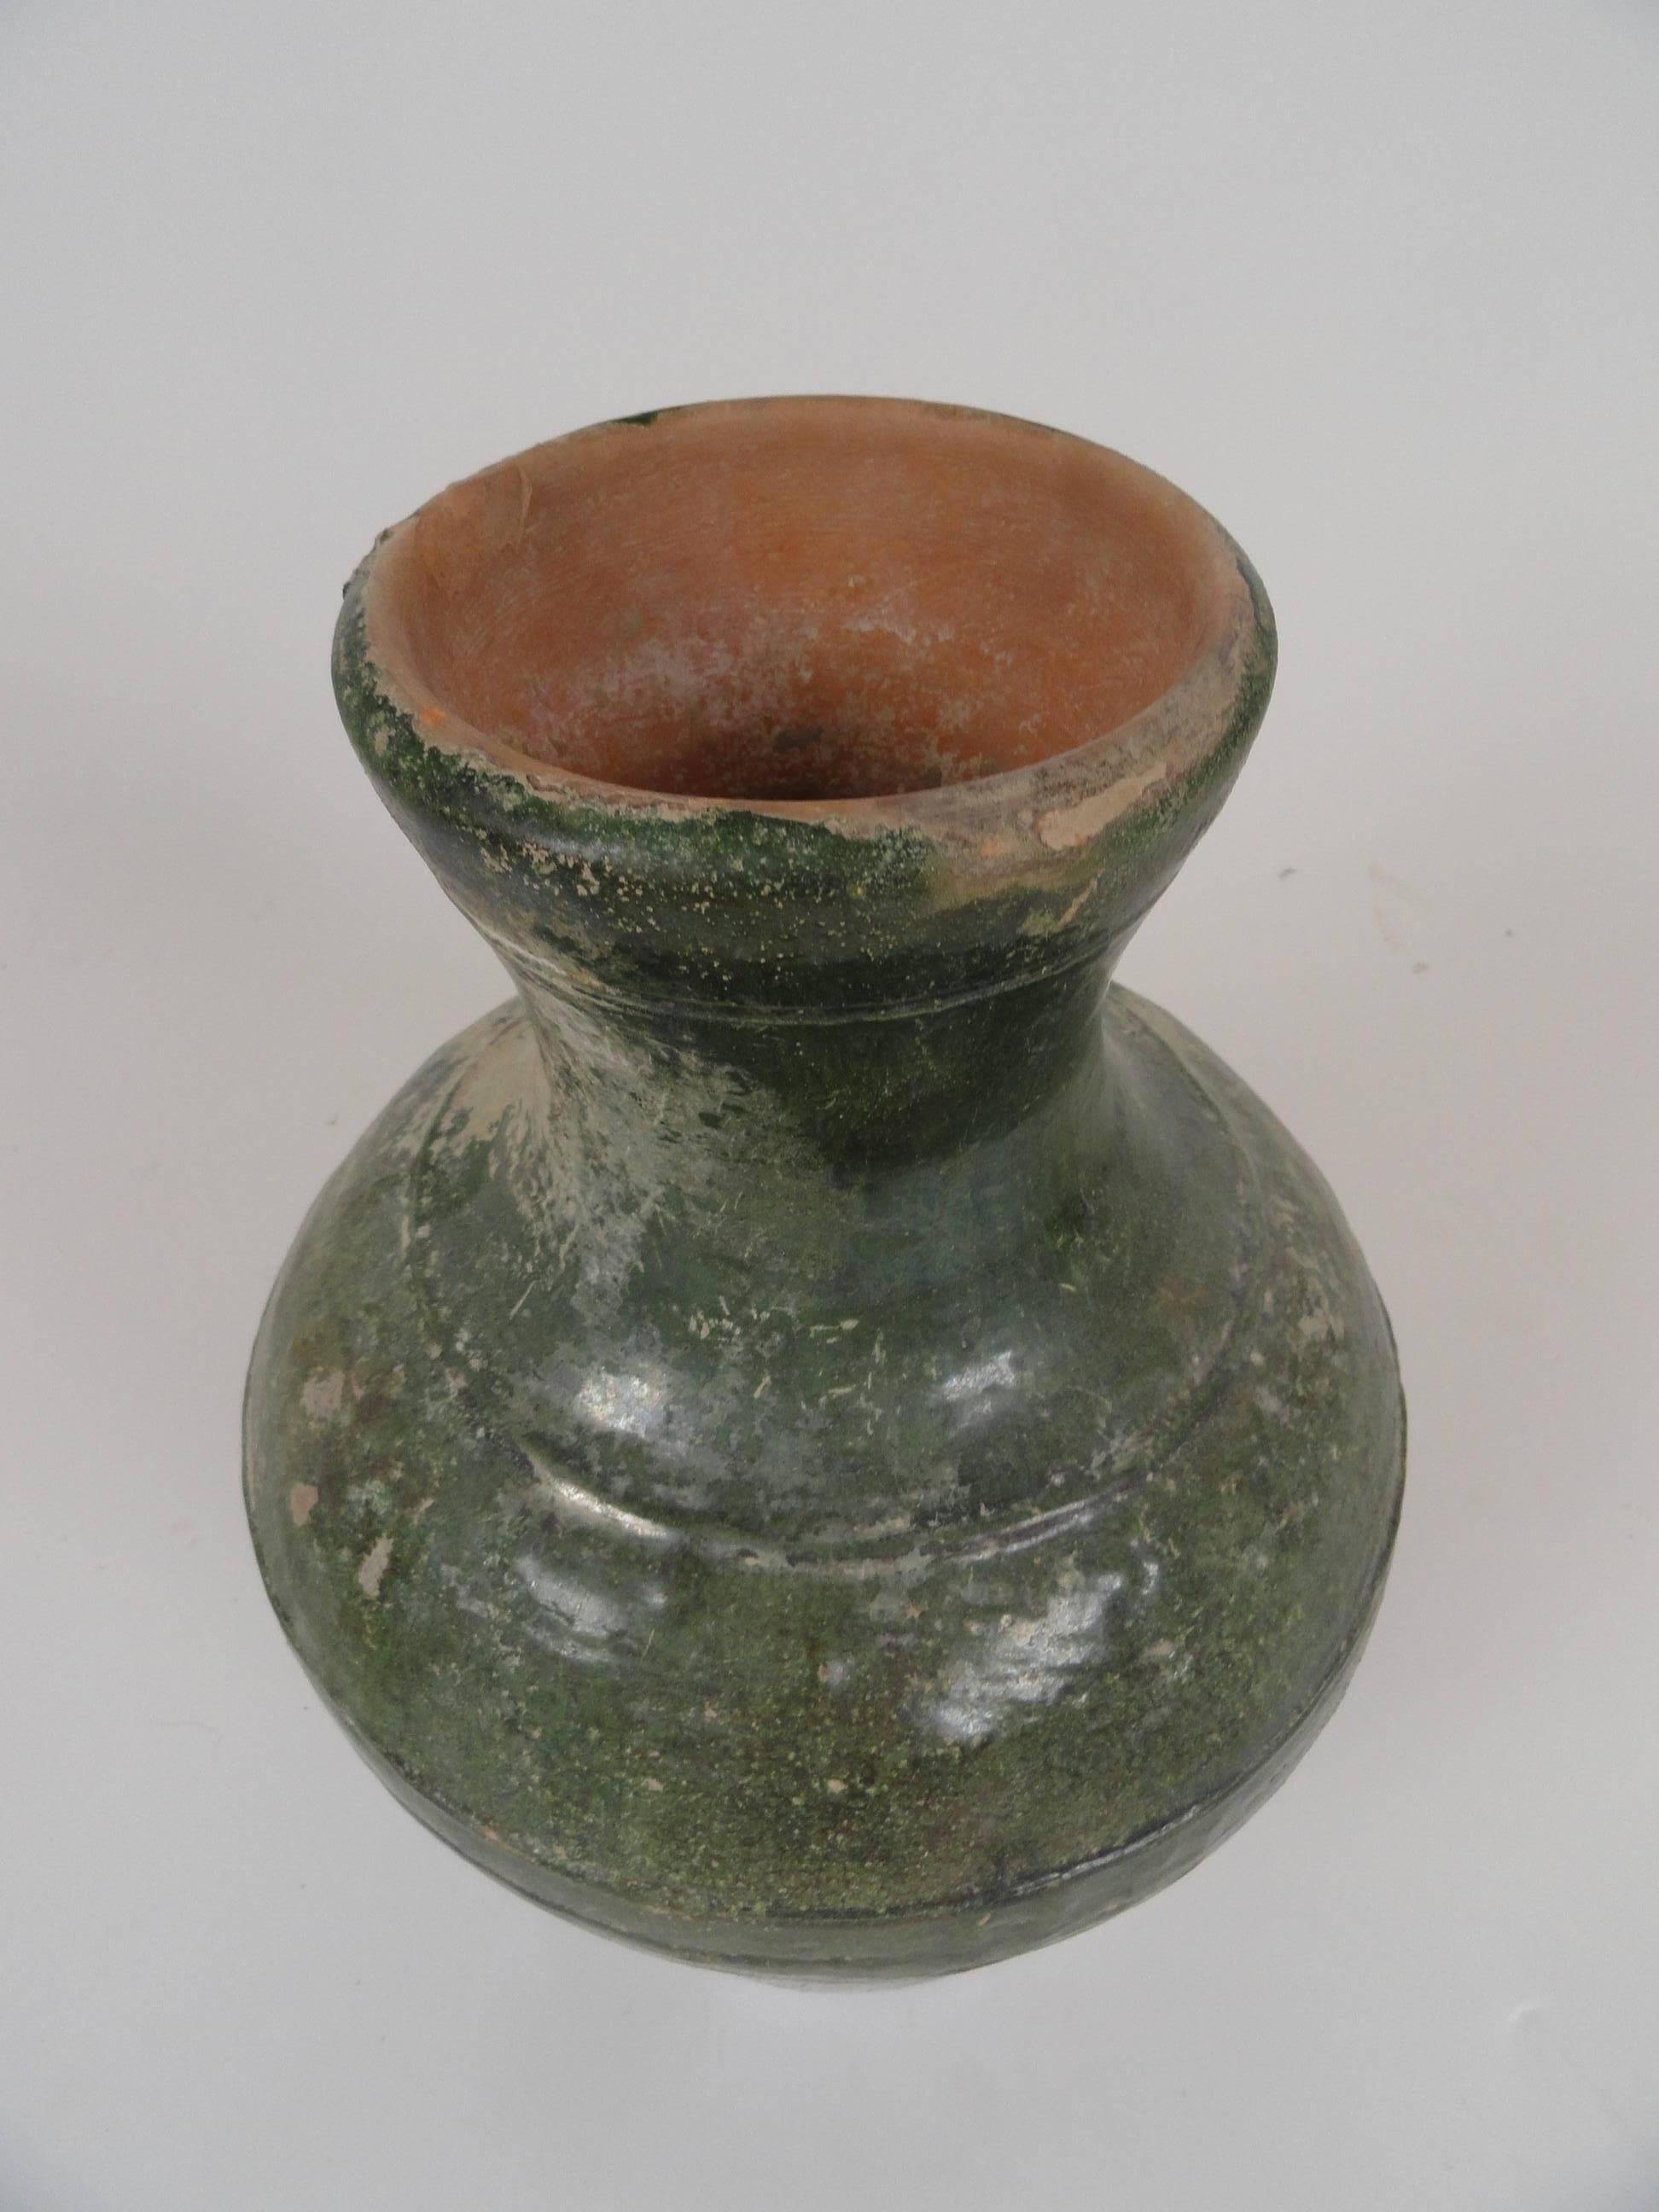 Chinese Han dynasty glazed ceramic urn featuring tones of deep green. Large mouth. Decorative incised bands surrounding the base.